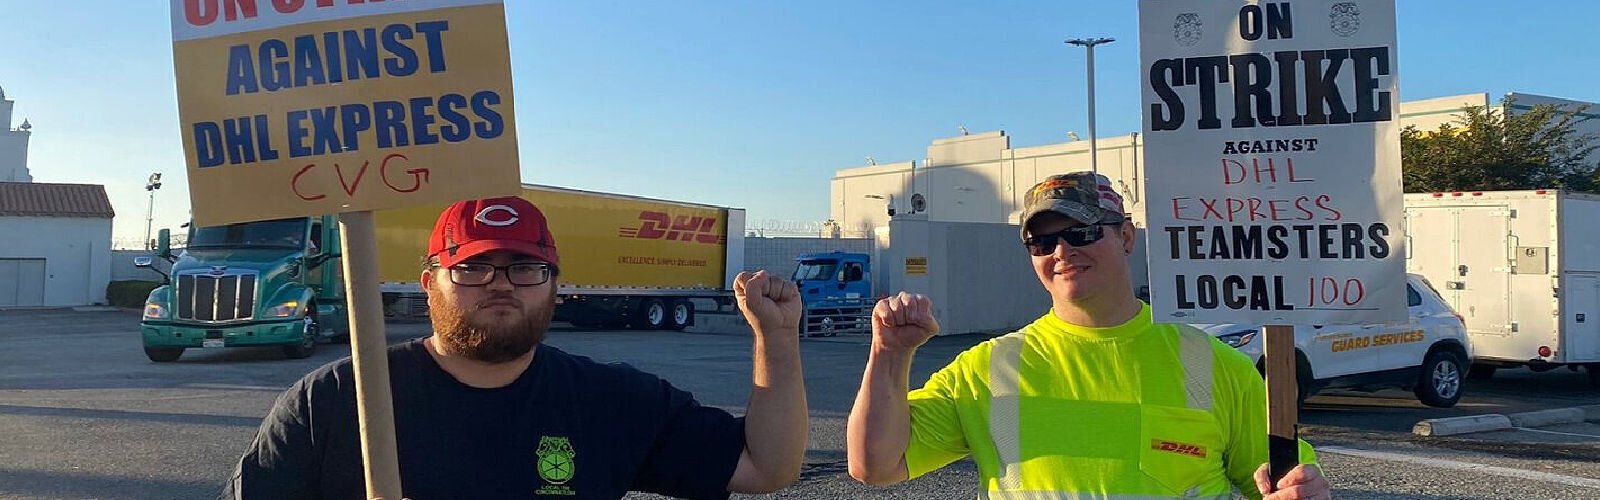 DHL workers at the airport went on strike for 12 days.